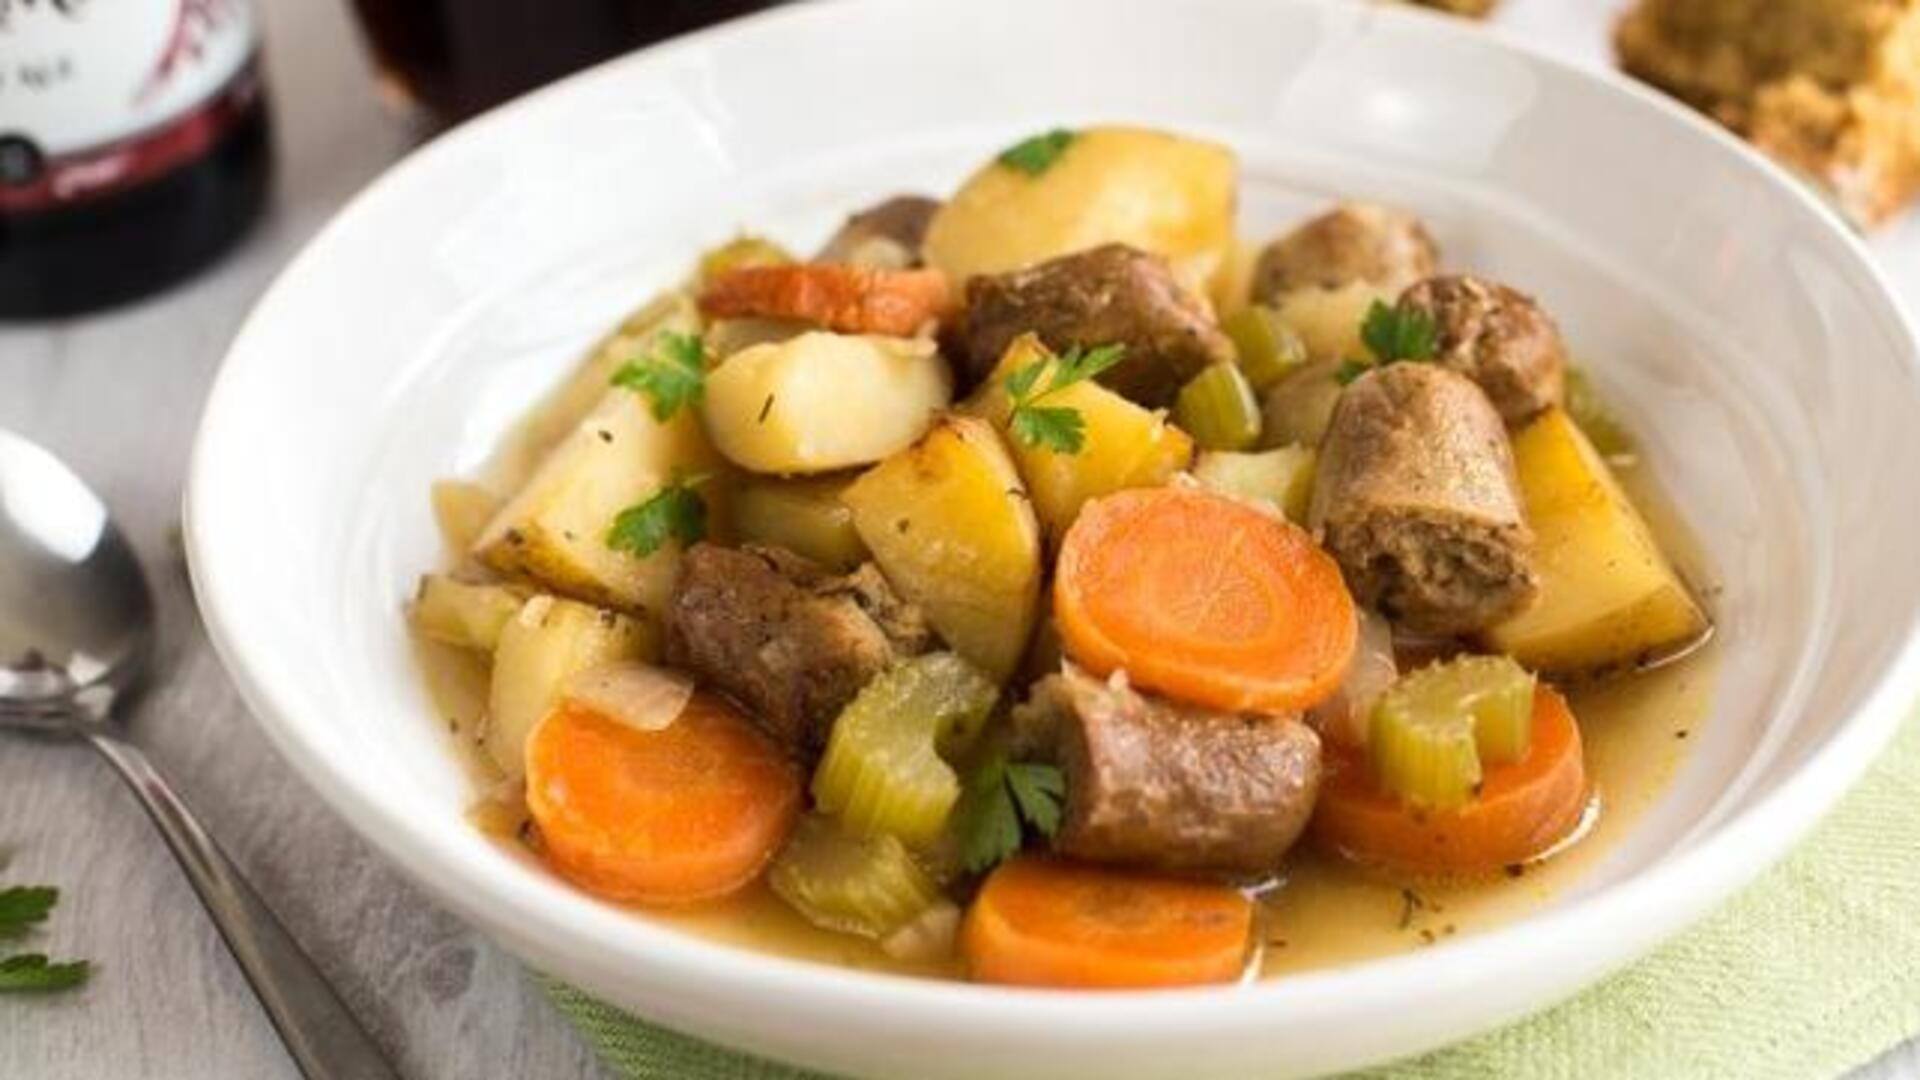 It's recipe time! Cook this hearty Irish vegetarian stew